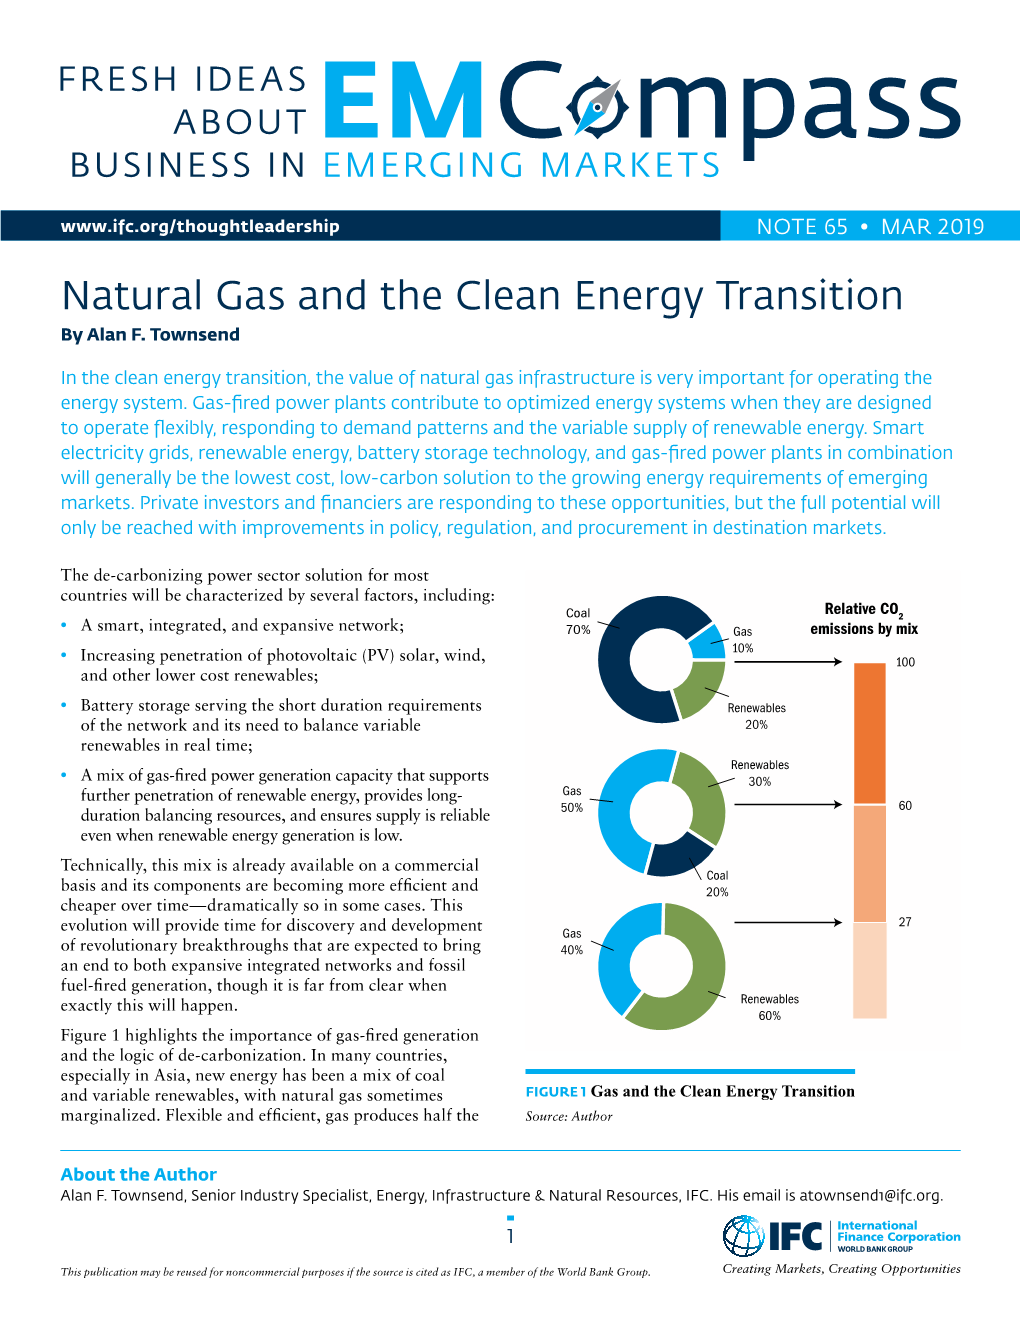 Natural Gas and the Clean Energy Transition by Alan F